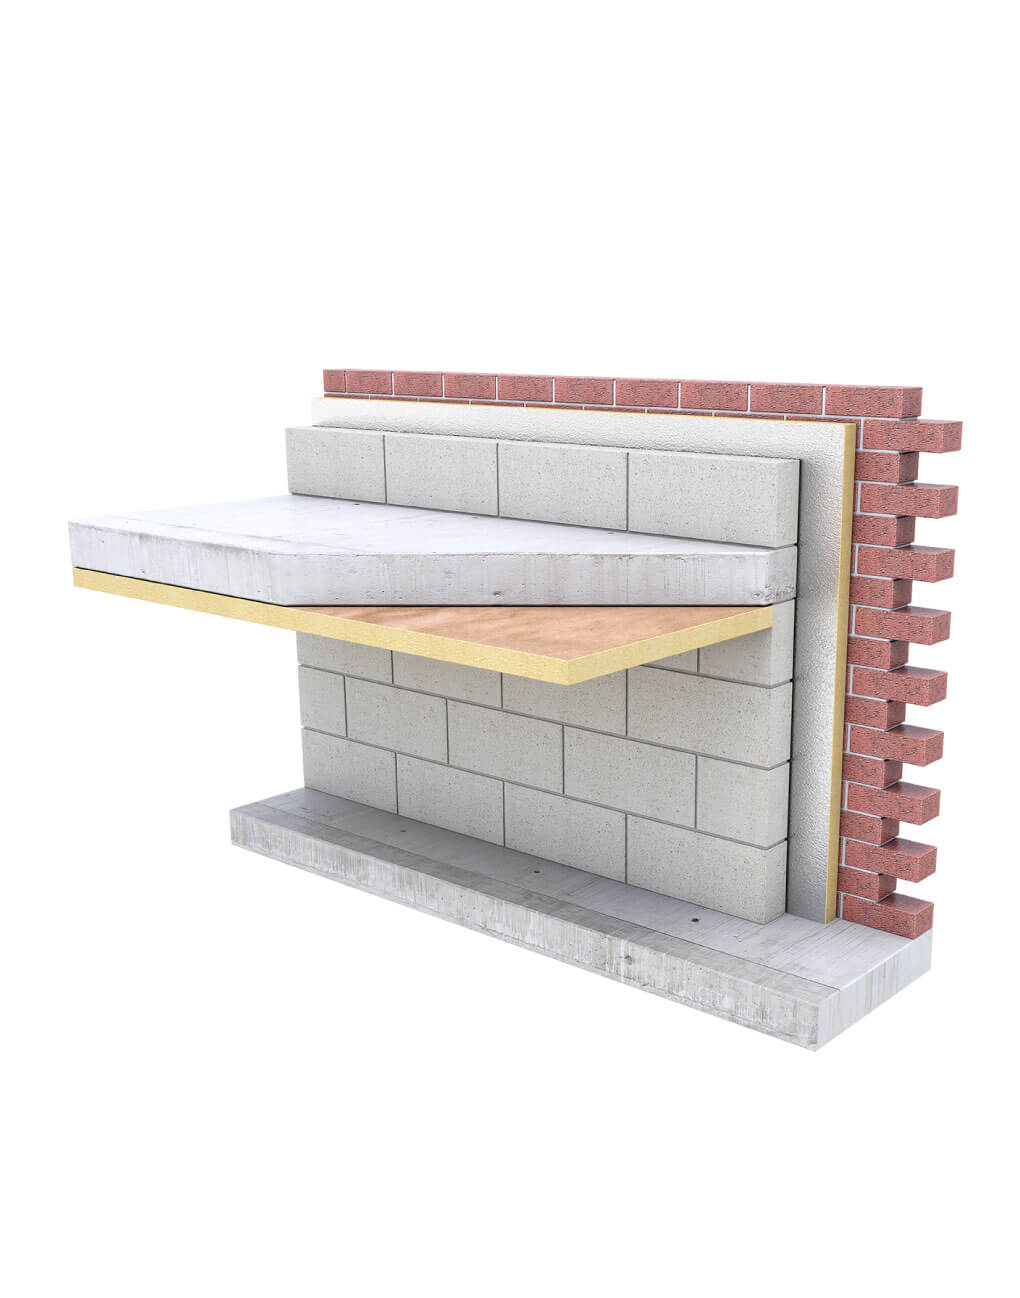 Buy MetecnoTherm Insulated Rigid Board PIR XPS Insulation